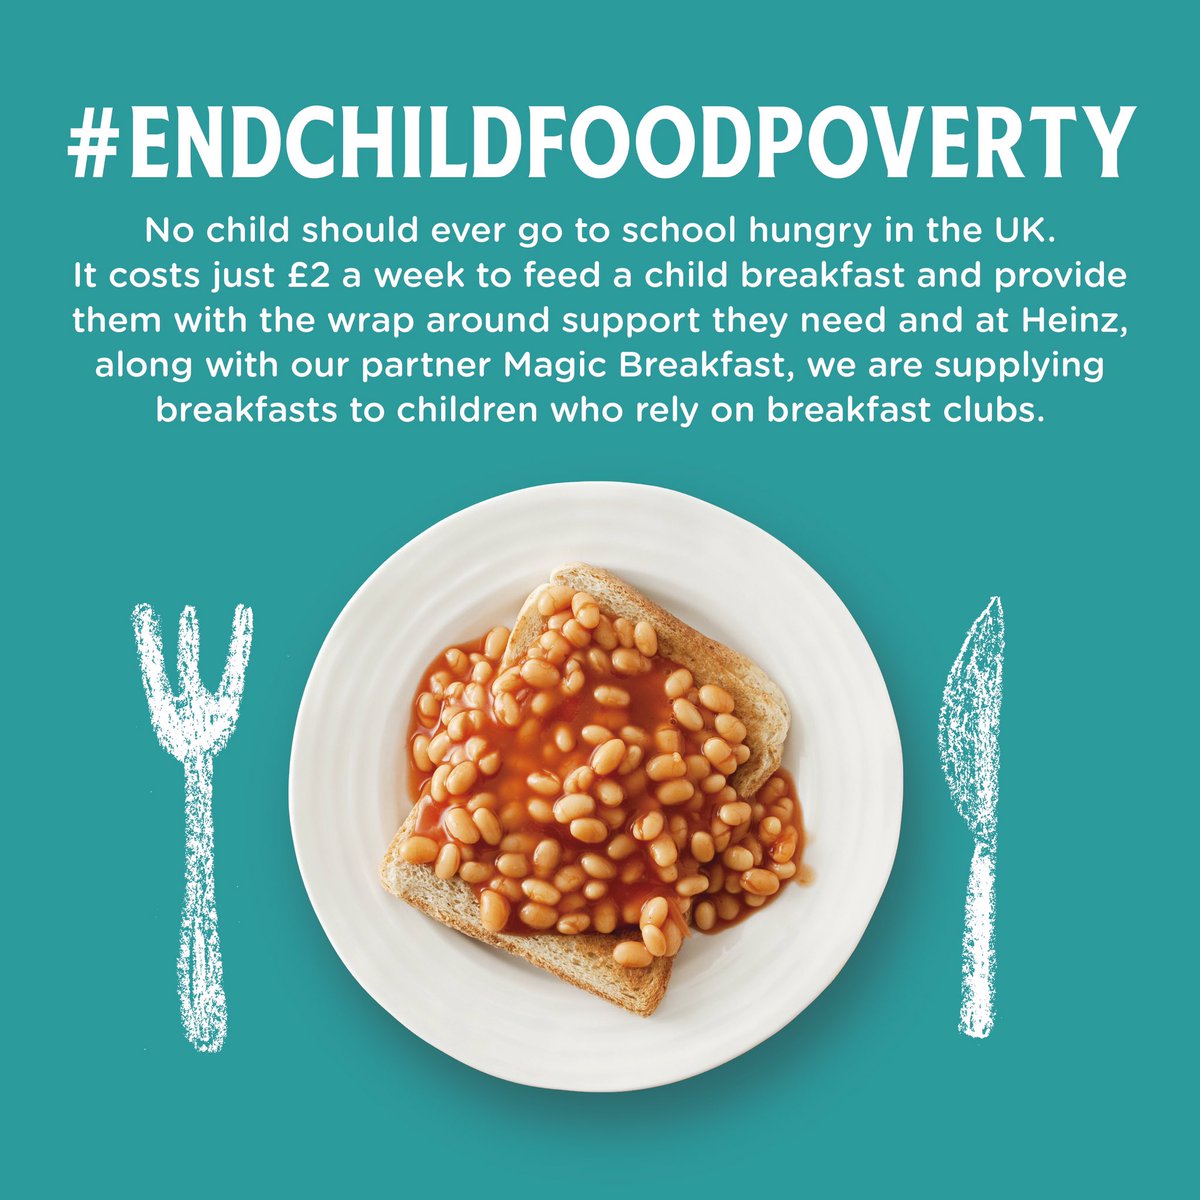 How we continue to help (1) – Since April we have pledged over 12m nutritious Beanz breakfasts with our charity partners @magic_breakfast to help #endchildfoodpoverty. Find out more heinz.co.uk/silencetherumb… to donate. @MarcusRashford